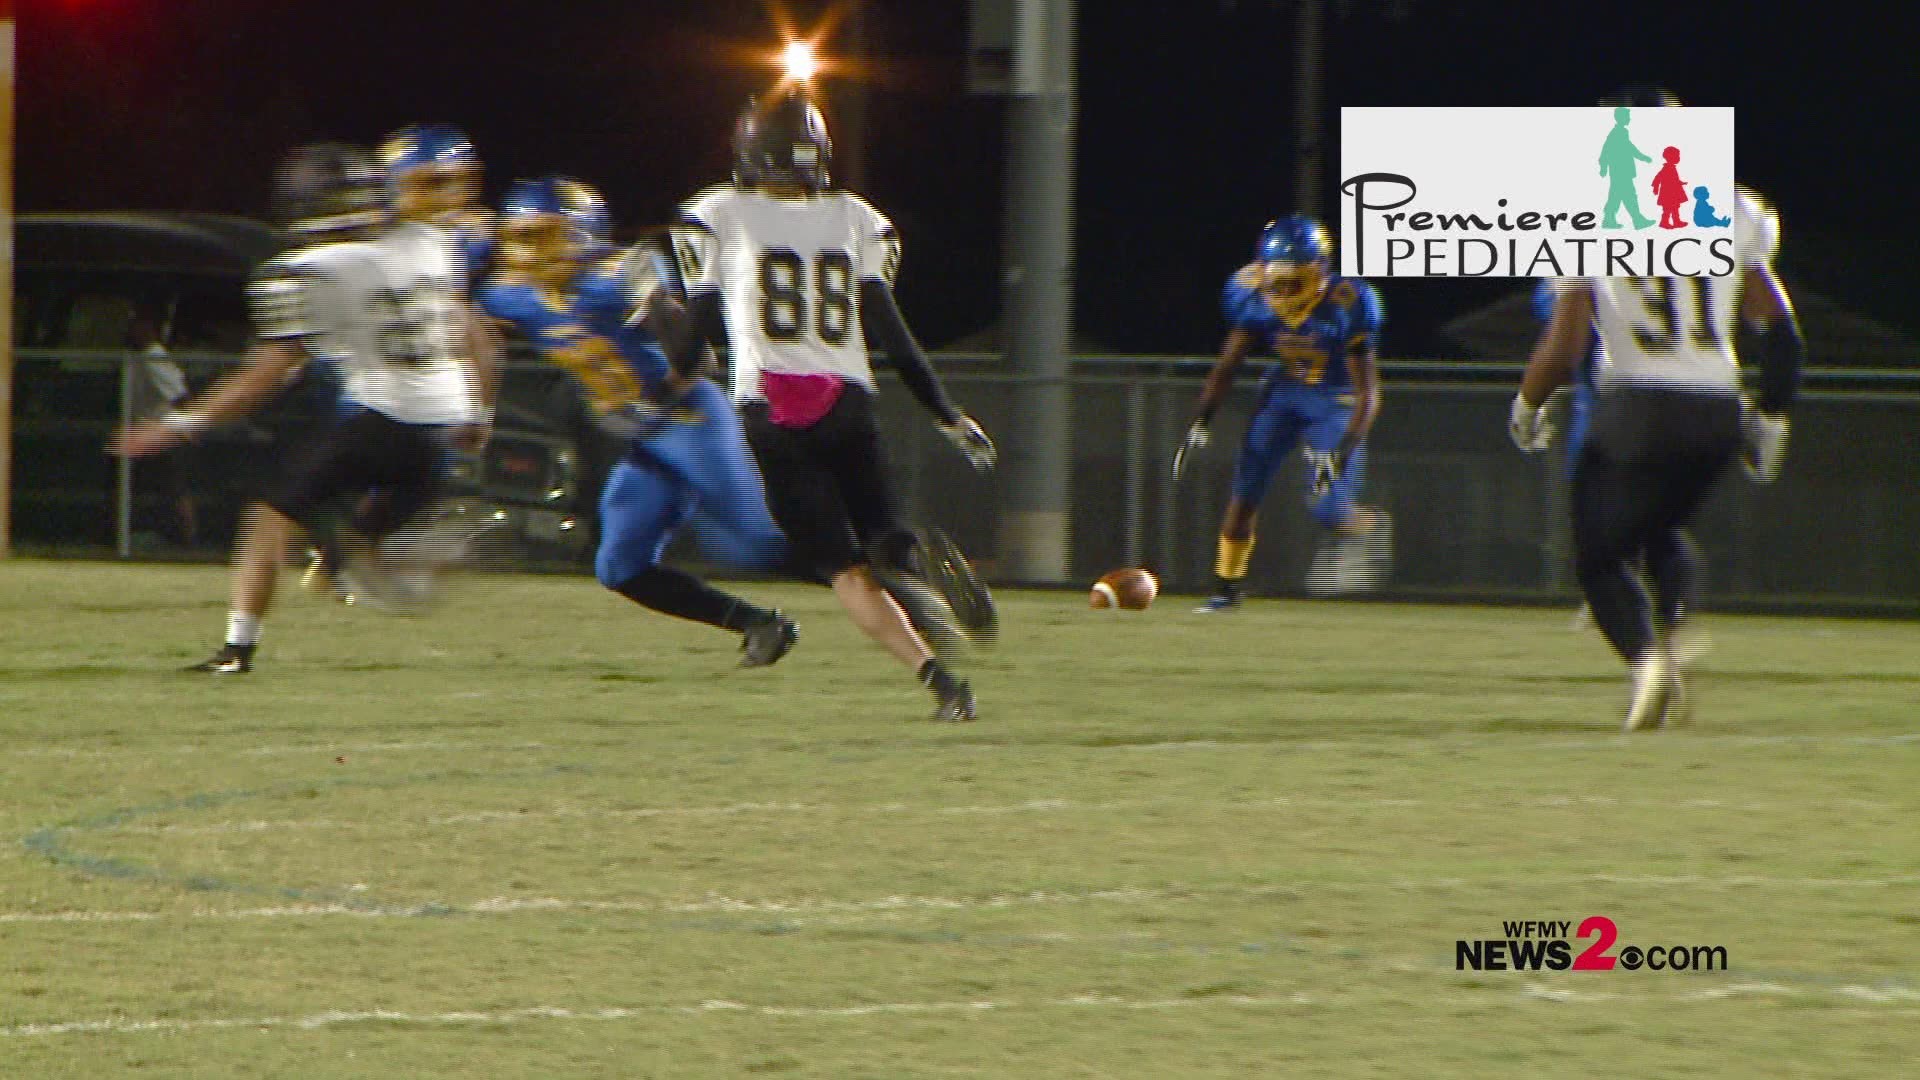 Oct. 12th FFF Premier Pediatrics Game Of The Week:  W. Guilford vs. Dudley